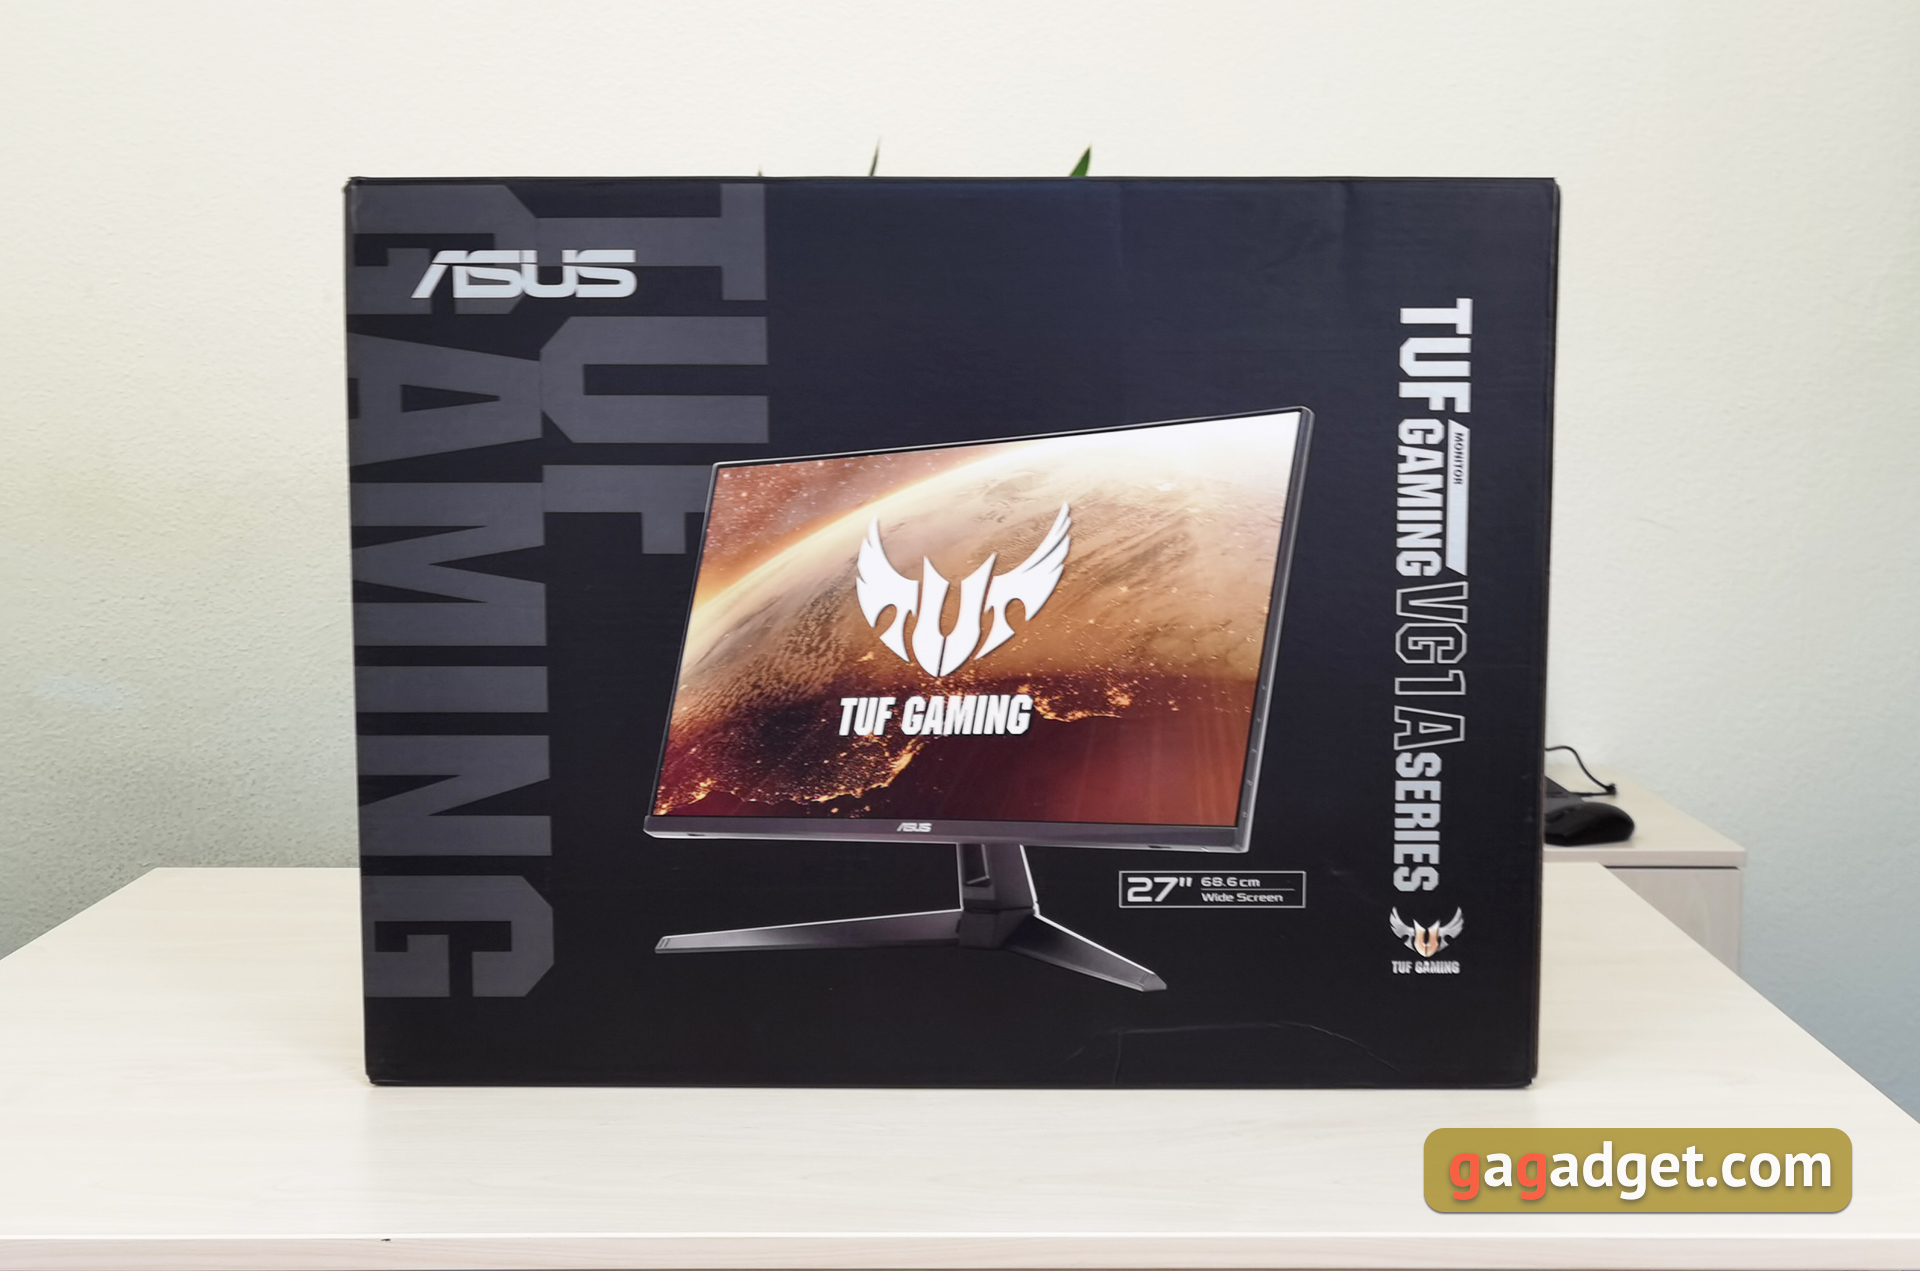 ASUS TUF Gaming VG279Q1A review: 27-inch gaming monitor with IPS panel and 165 Hz refresh rate-2